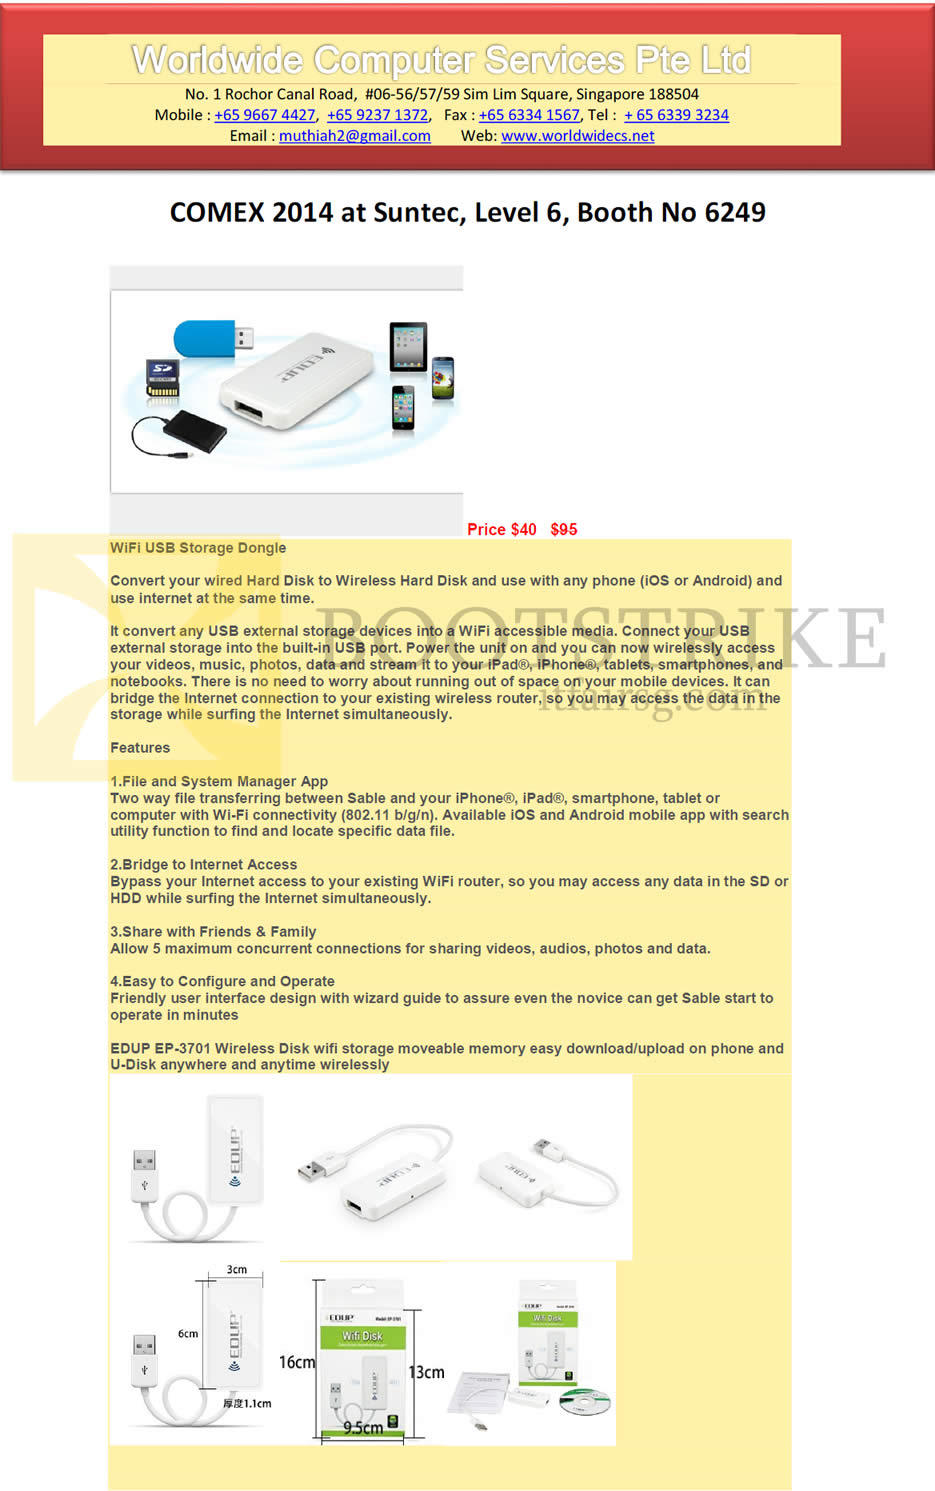 COMEX 2014 price list image brochure of Worldwide Computer Services Wireless USB Storage Dongle